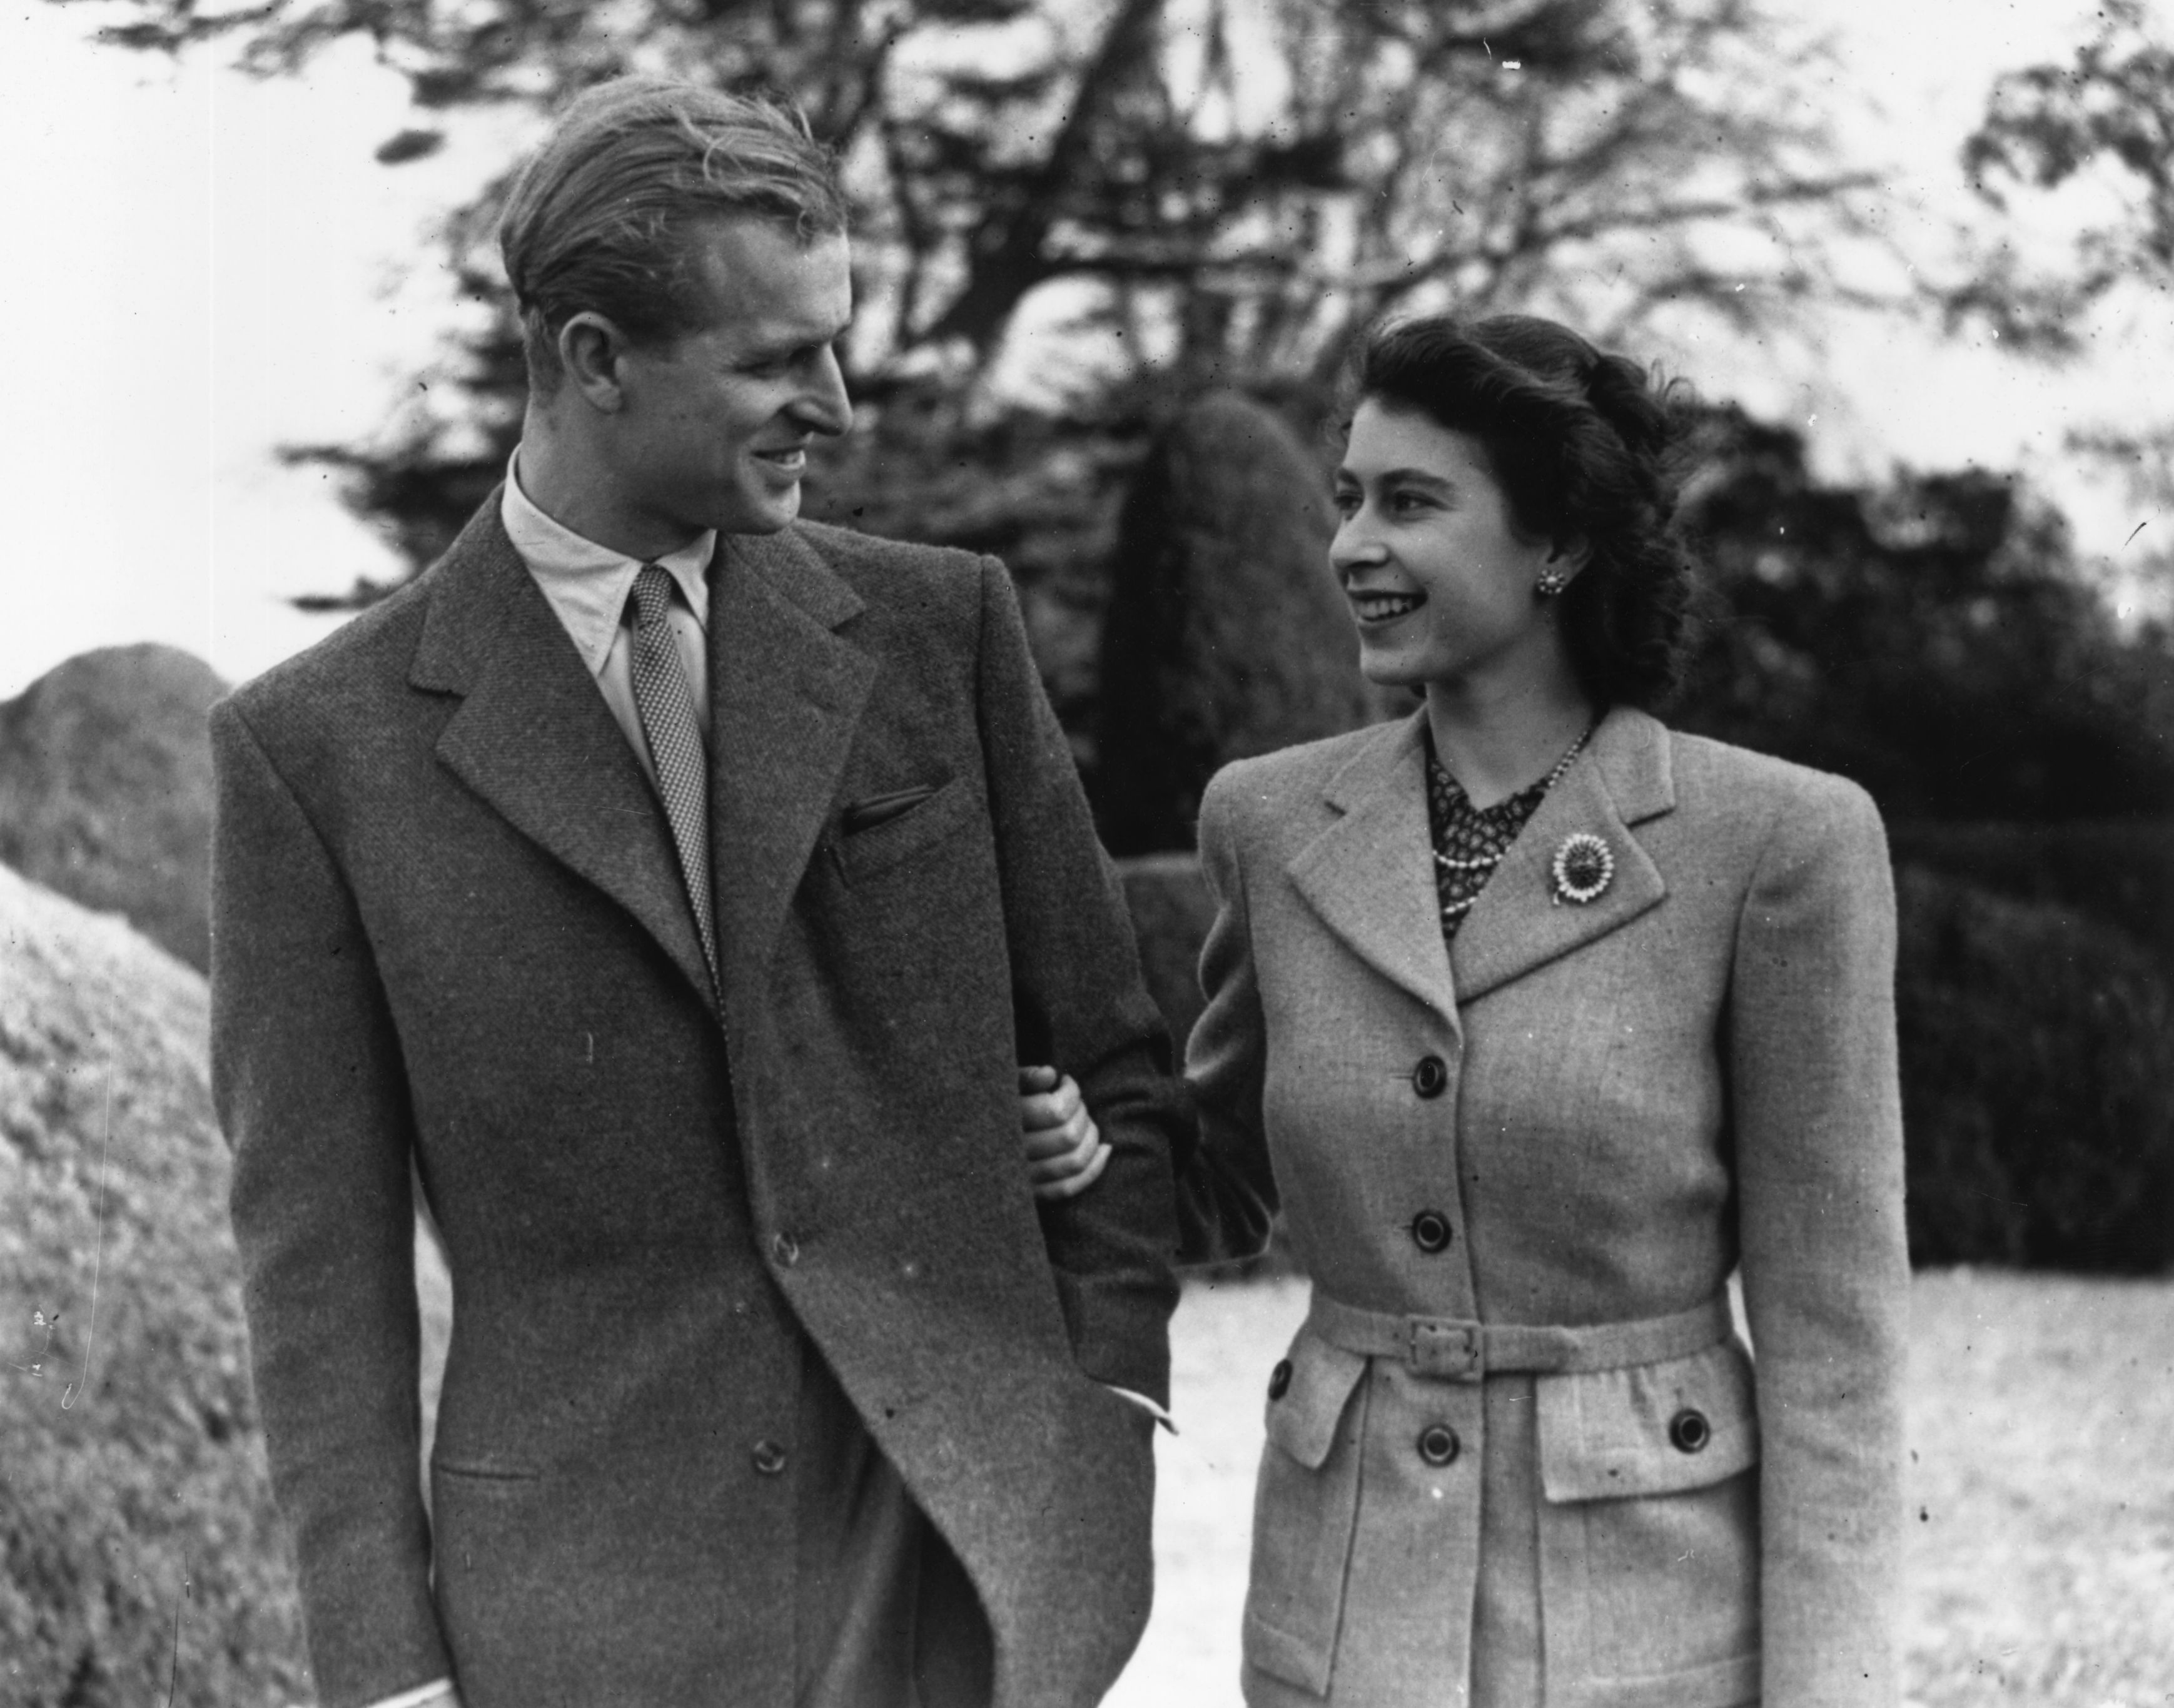 Black-and-white photo of then-Princess Elizabeth and Prince Philip enjoying a walk together during their honeymoon